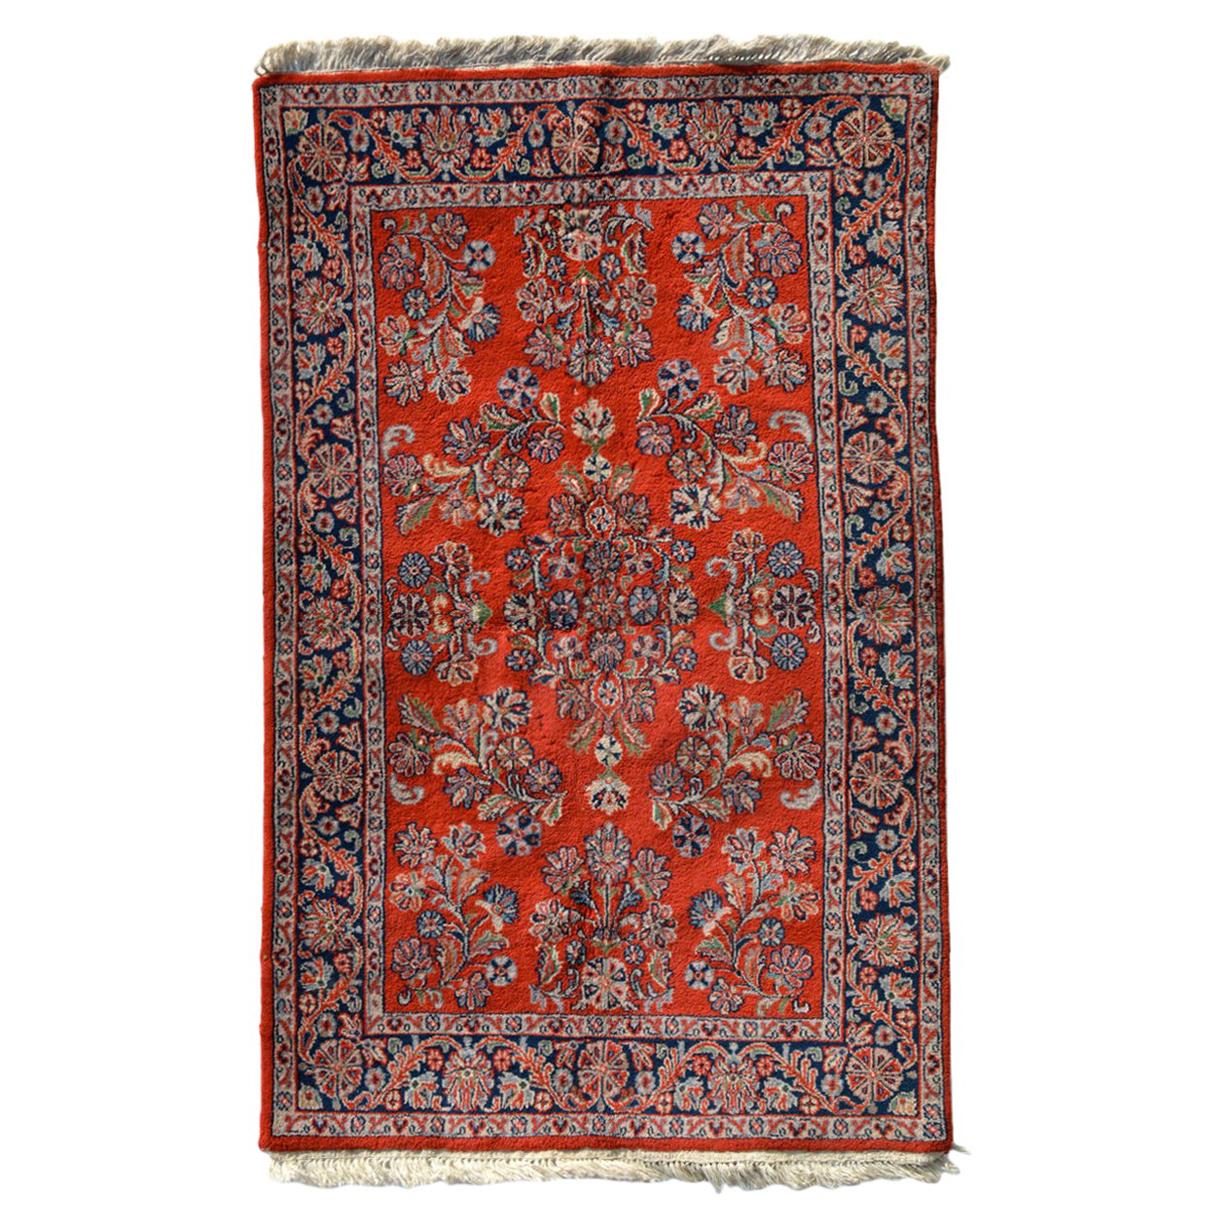  Antique Persian Rug Hand Knotted Red Green & Blue Tapestry, 1950s